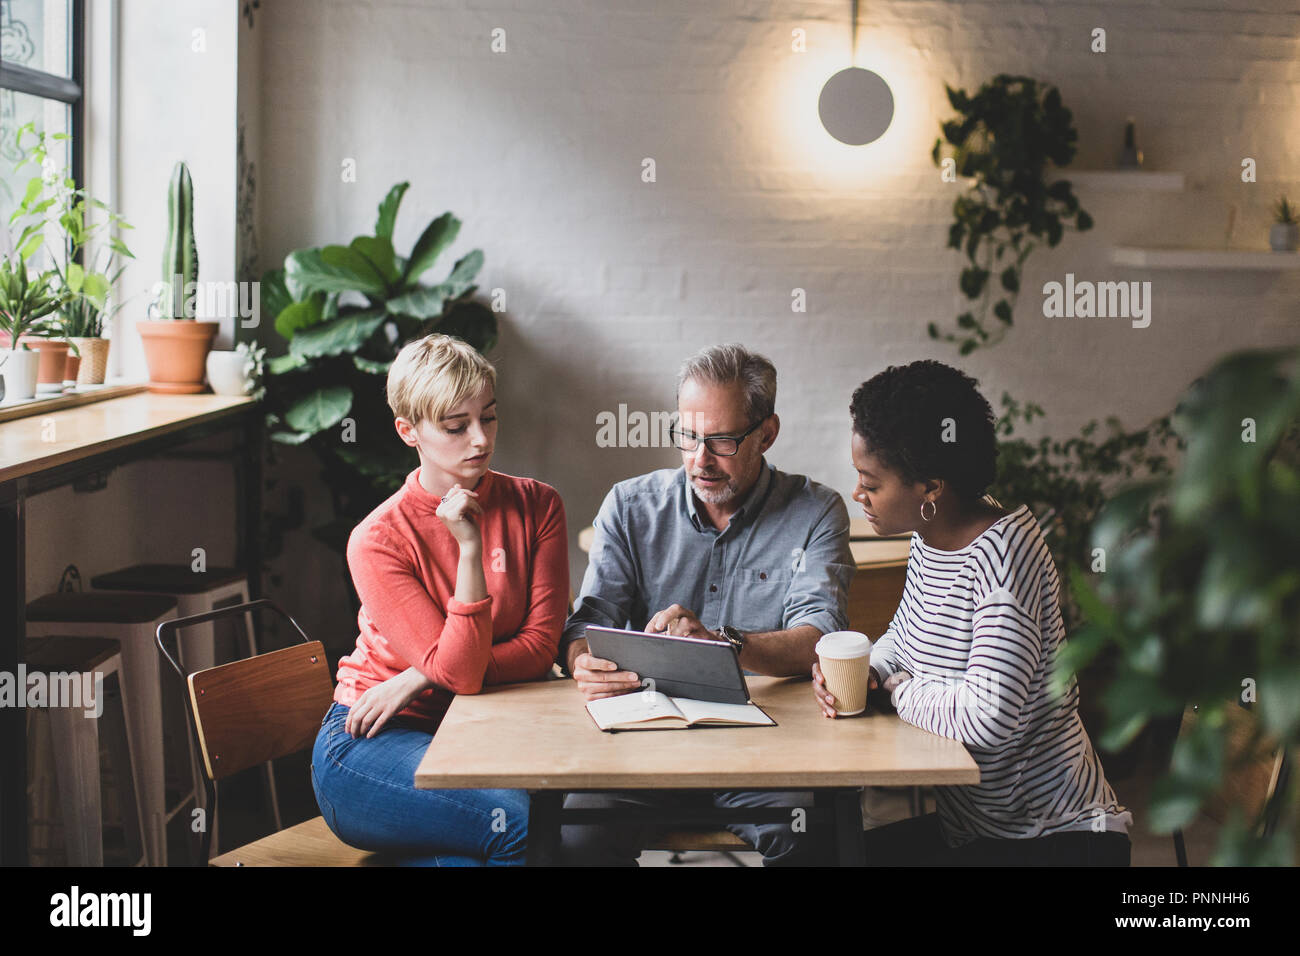 Coworkers having a meeting in a cafe Stock Photo